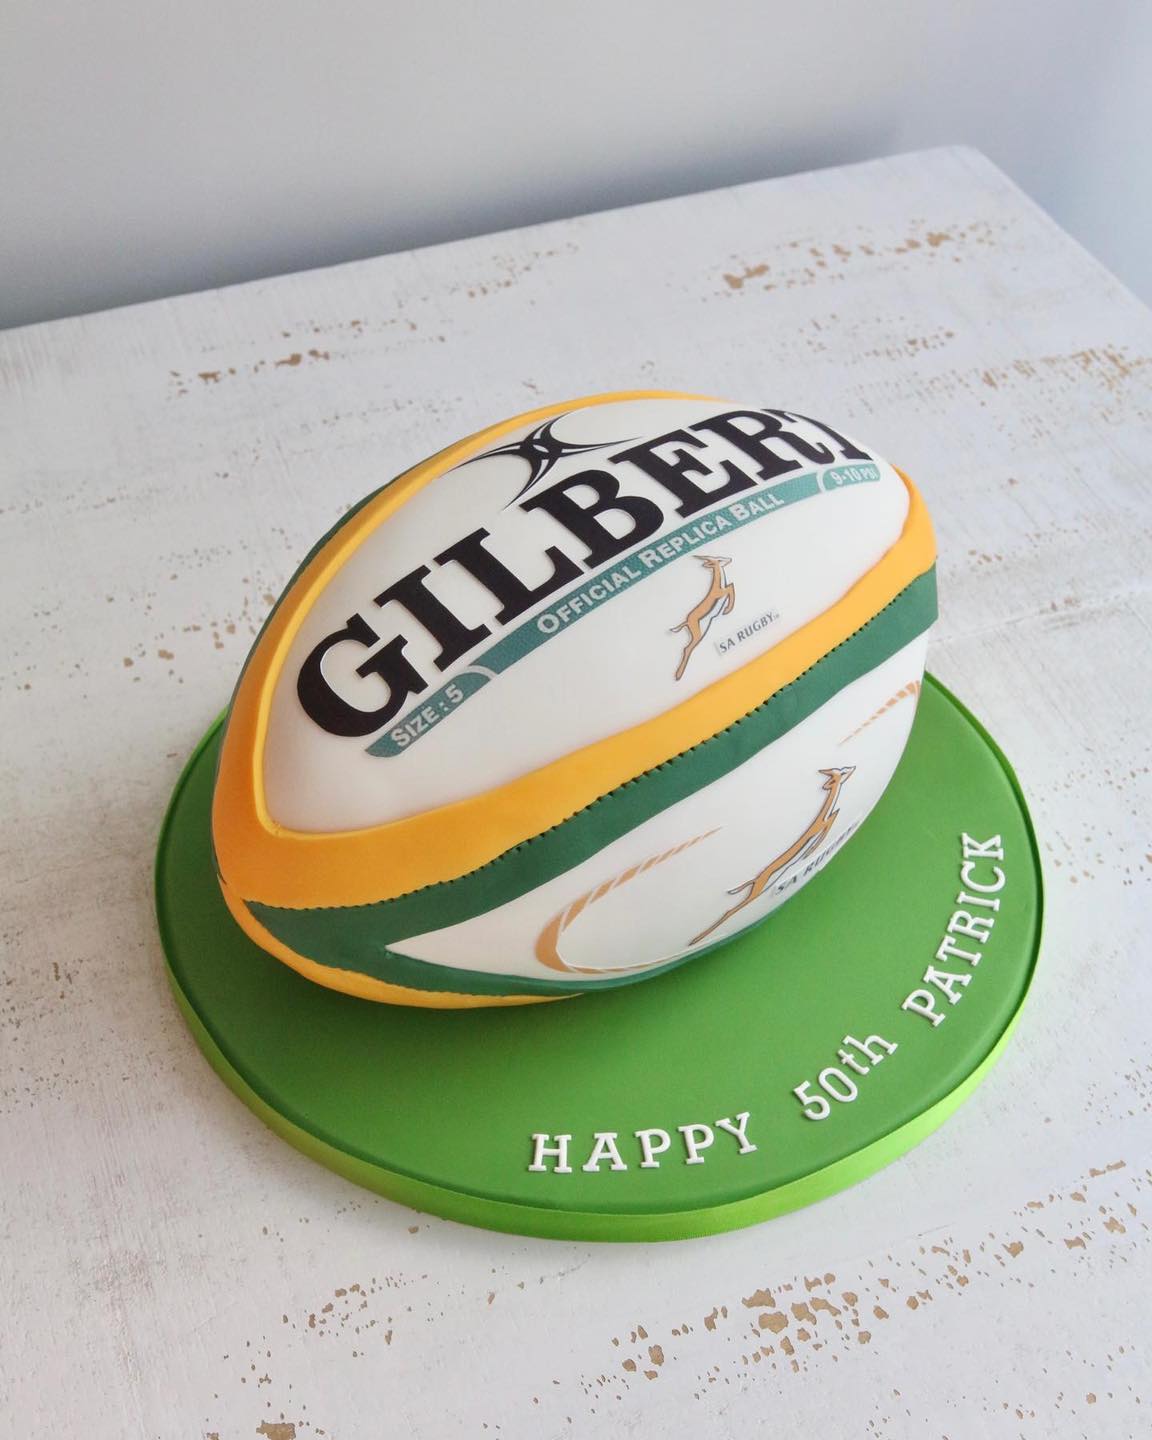 Details more than 70 welsh rugby birthday cake super hot - in.daotaonec